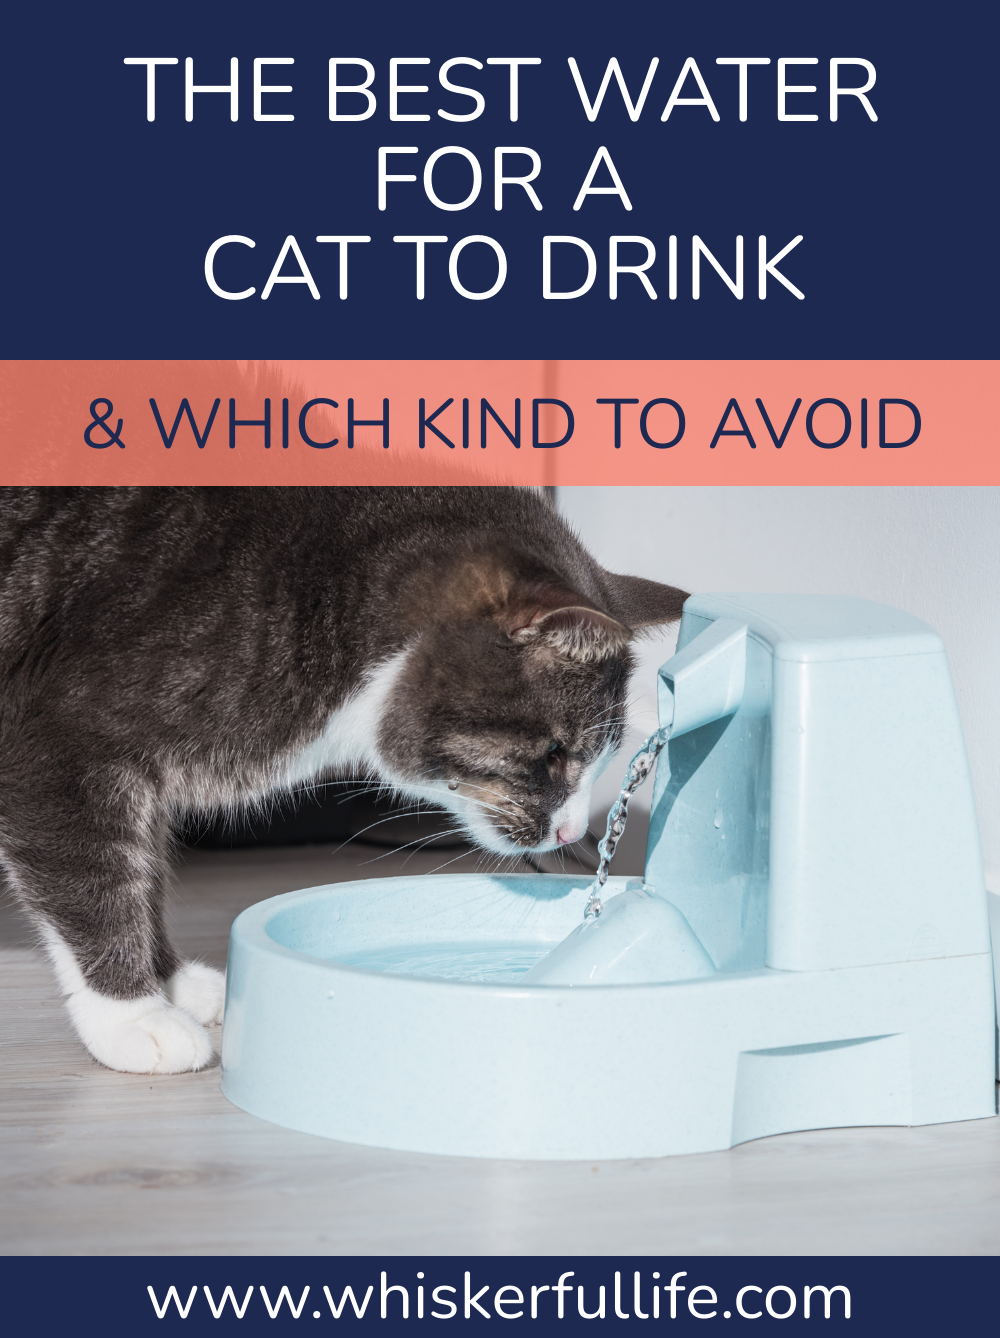 The Best Water for a Cat to Drink